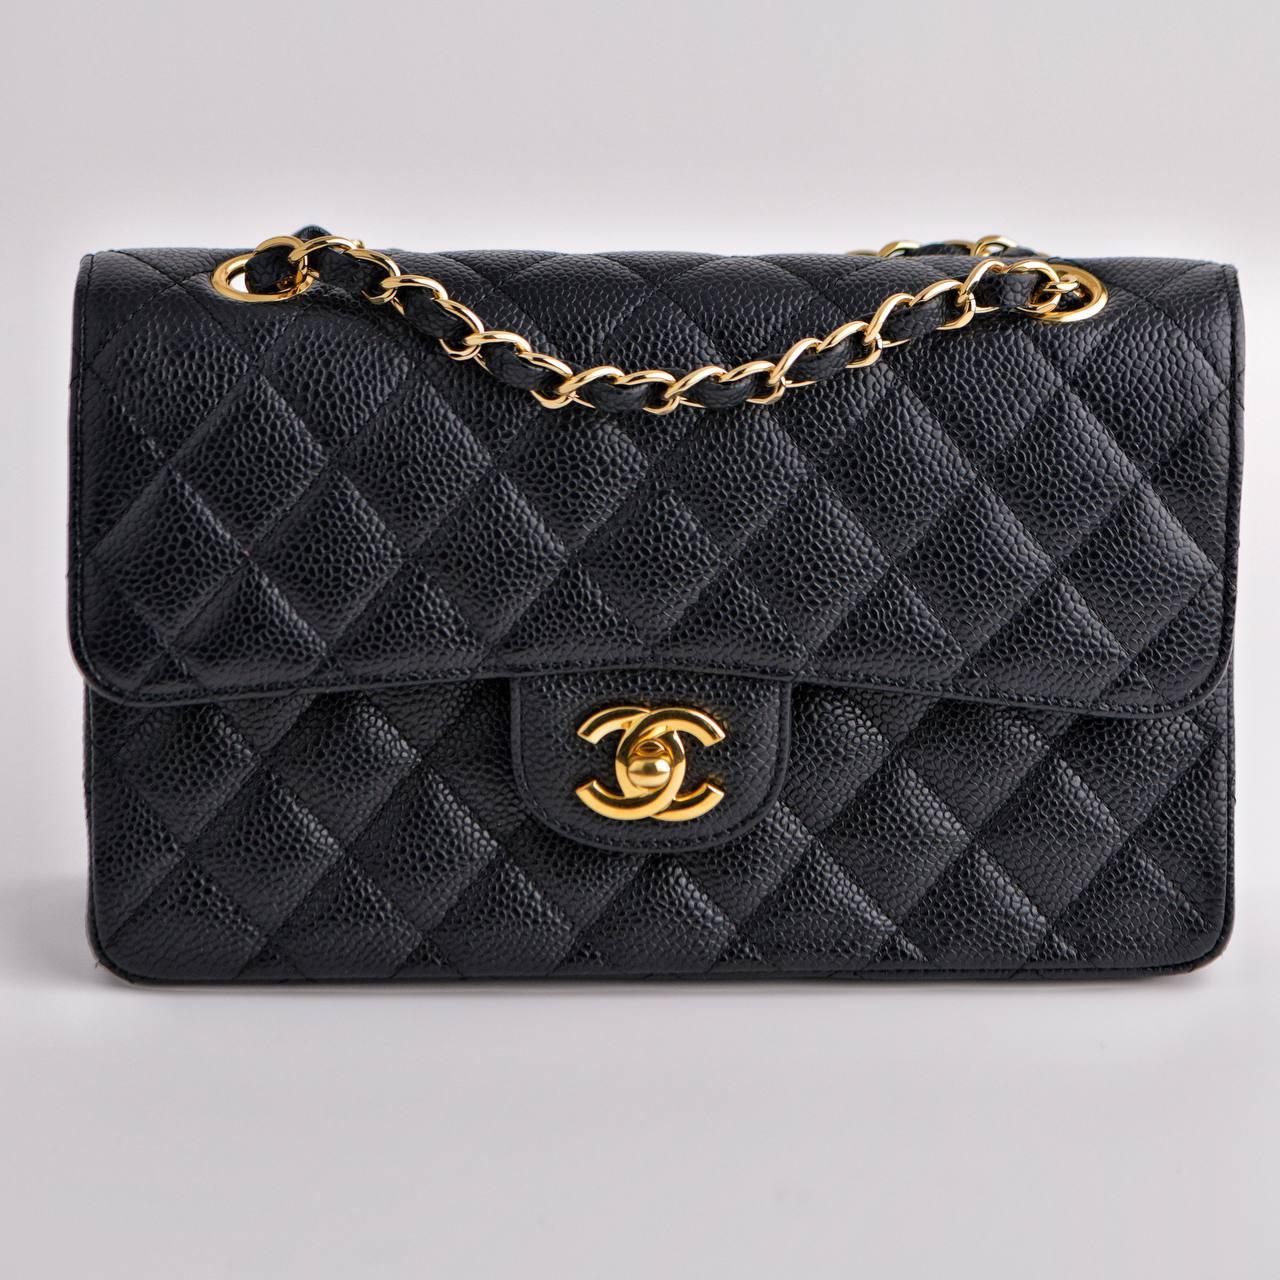 Chanel Small Double Classic Flap Calfskin GHW Bag In Excellent Condition For Sale In Banbury, GB